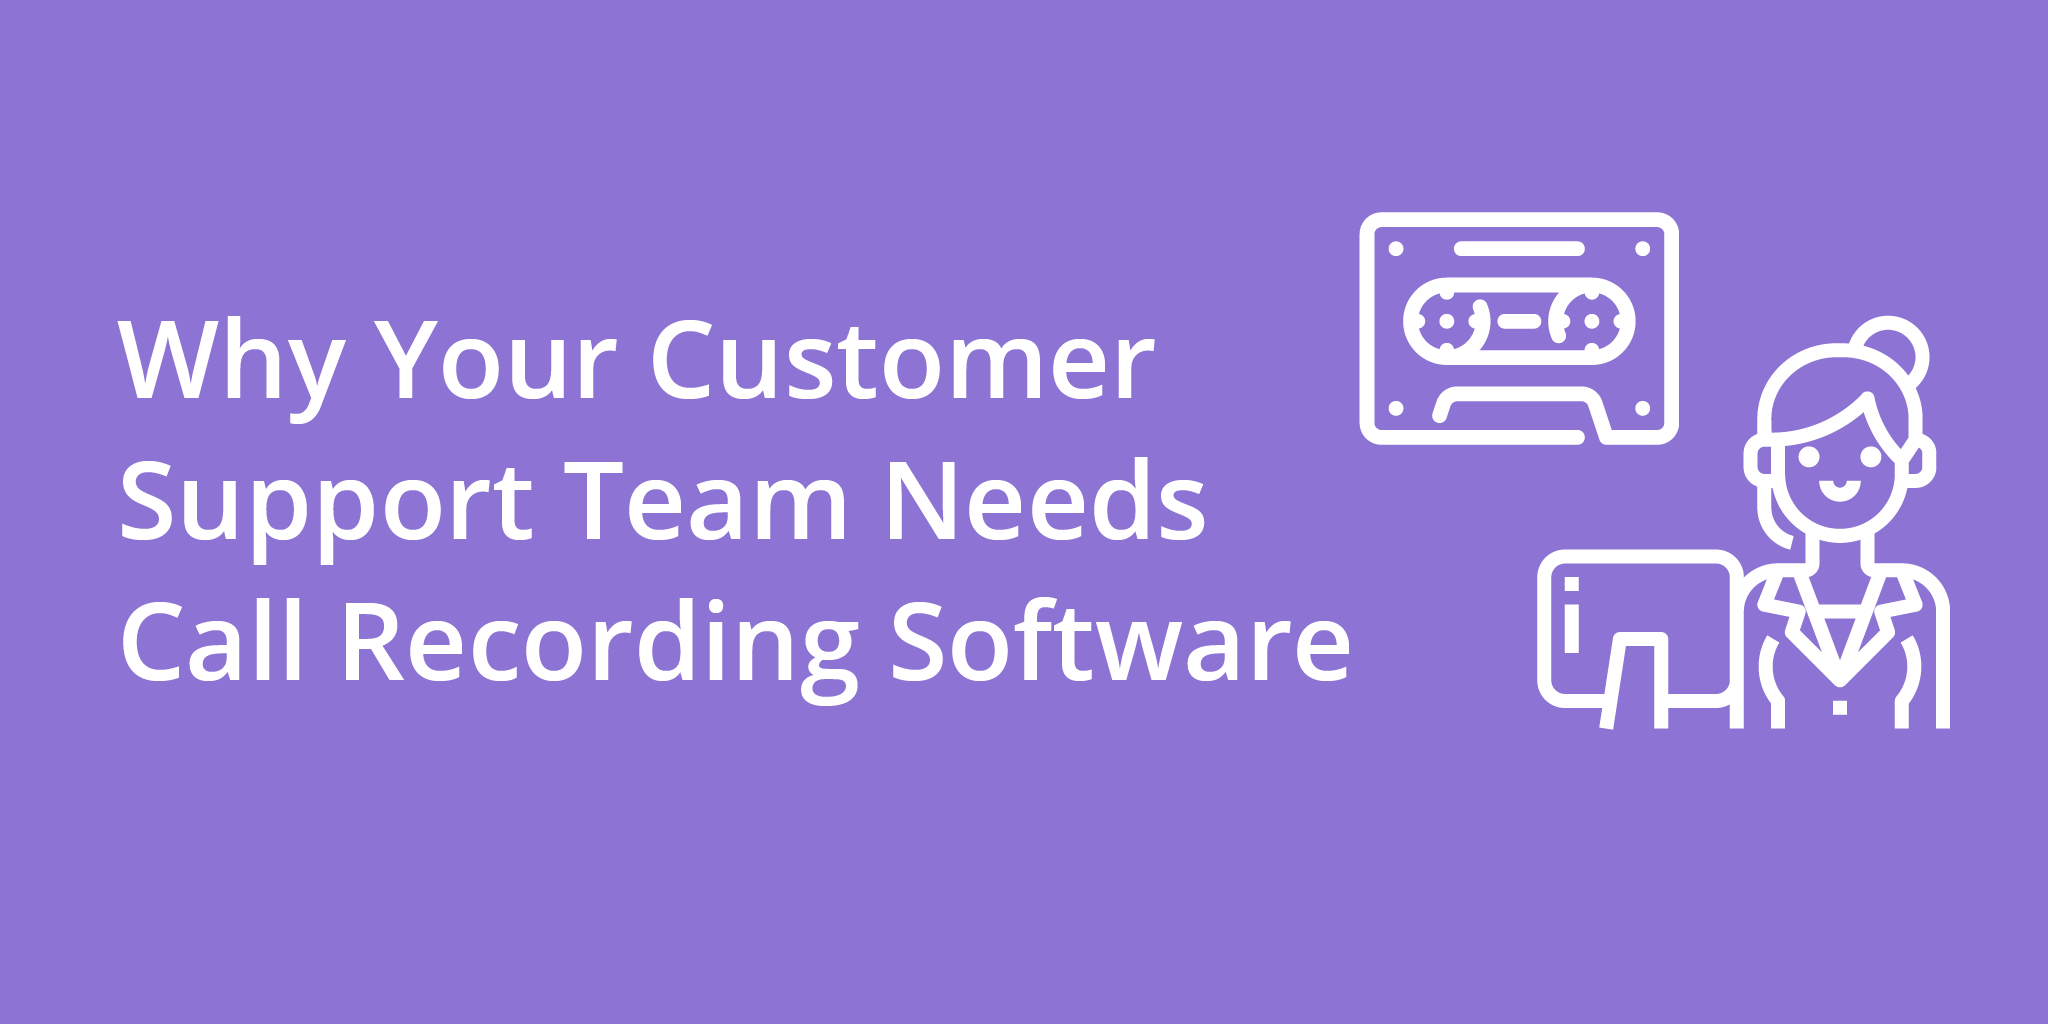 Why Your Customer Support Team Needs Call Recording Software | Telephones for business